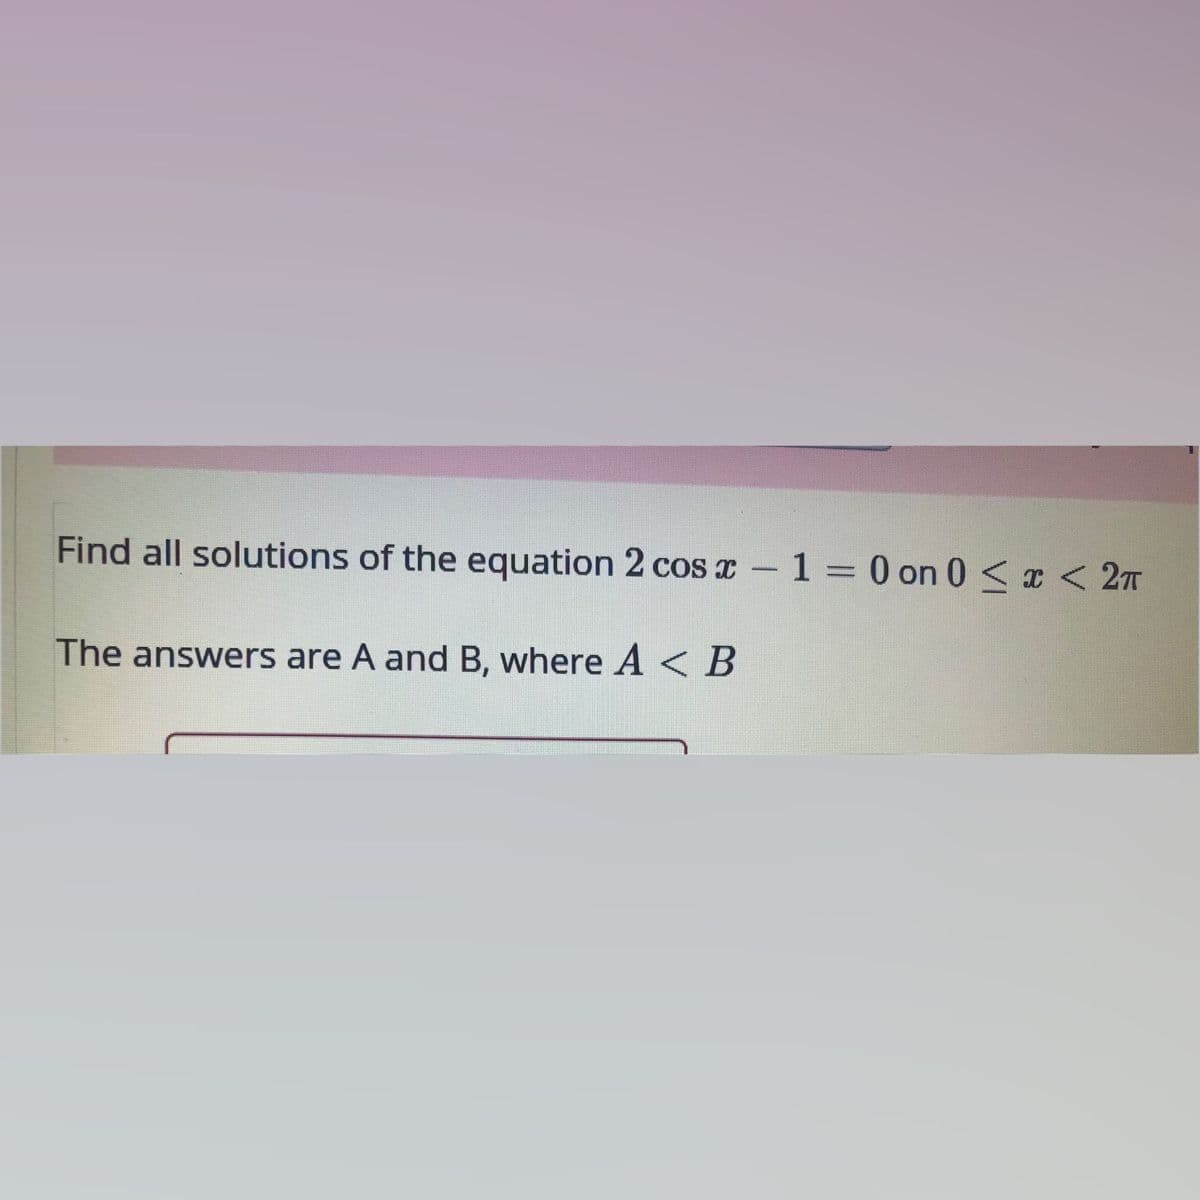 Find all solutions of the equation 2 cos r – 1 = 0 on 0 < I < 2T
The answers are A and B, where A < B
